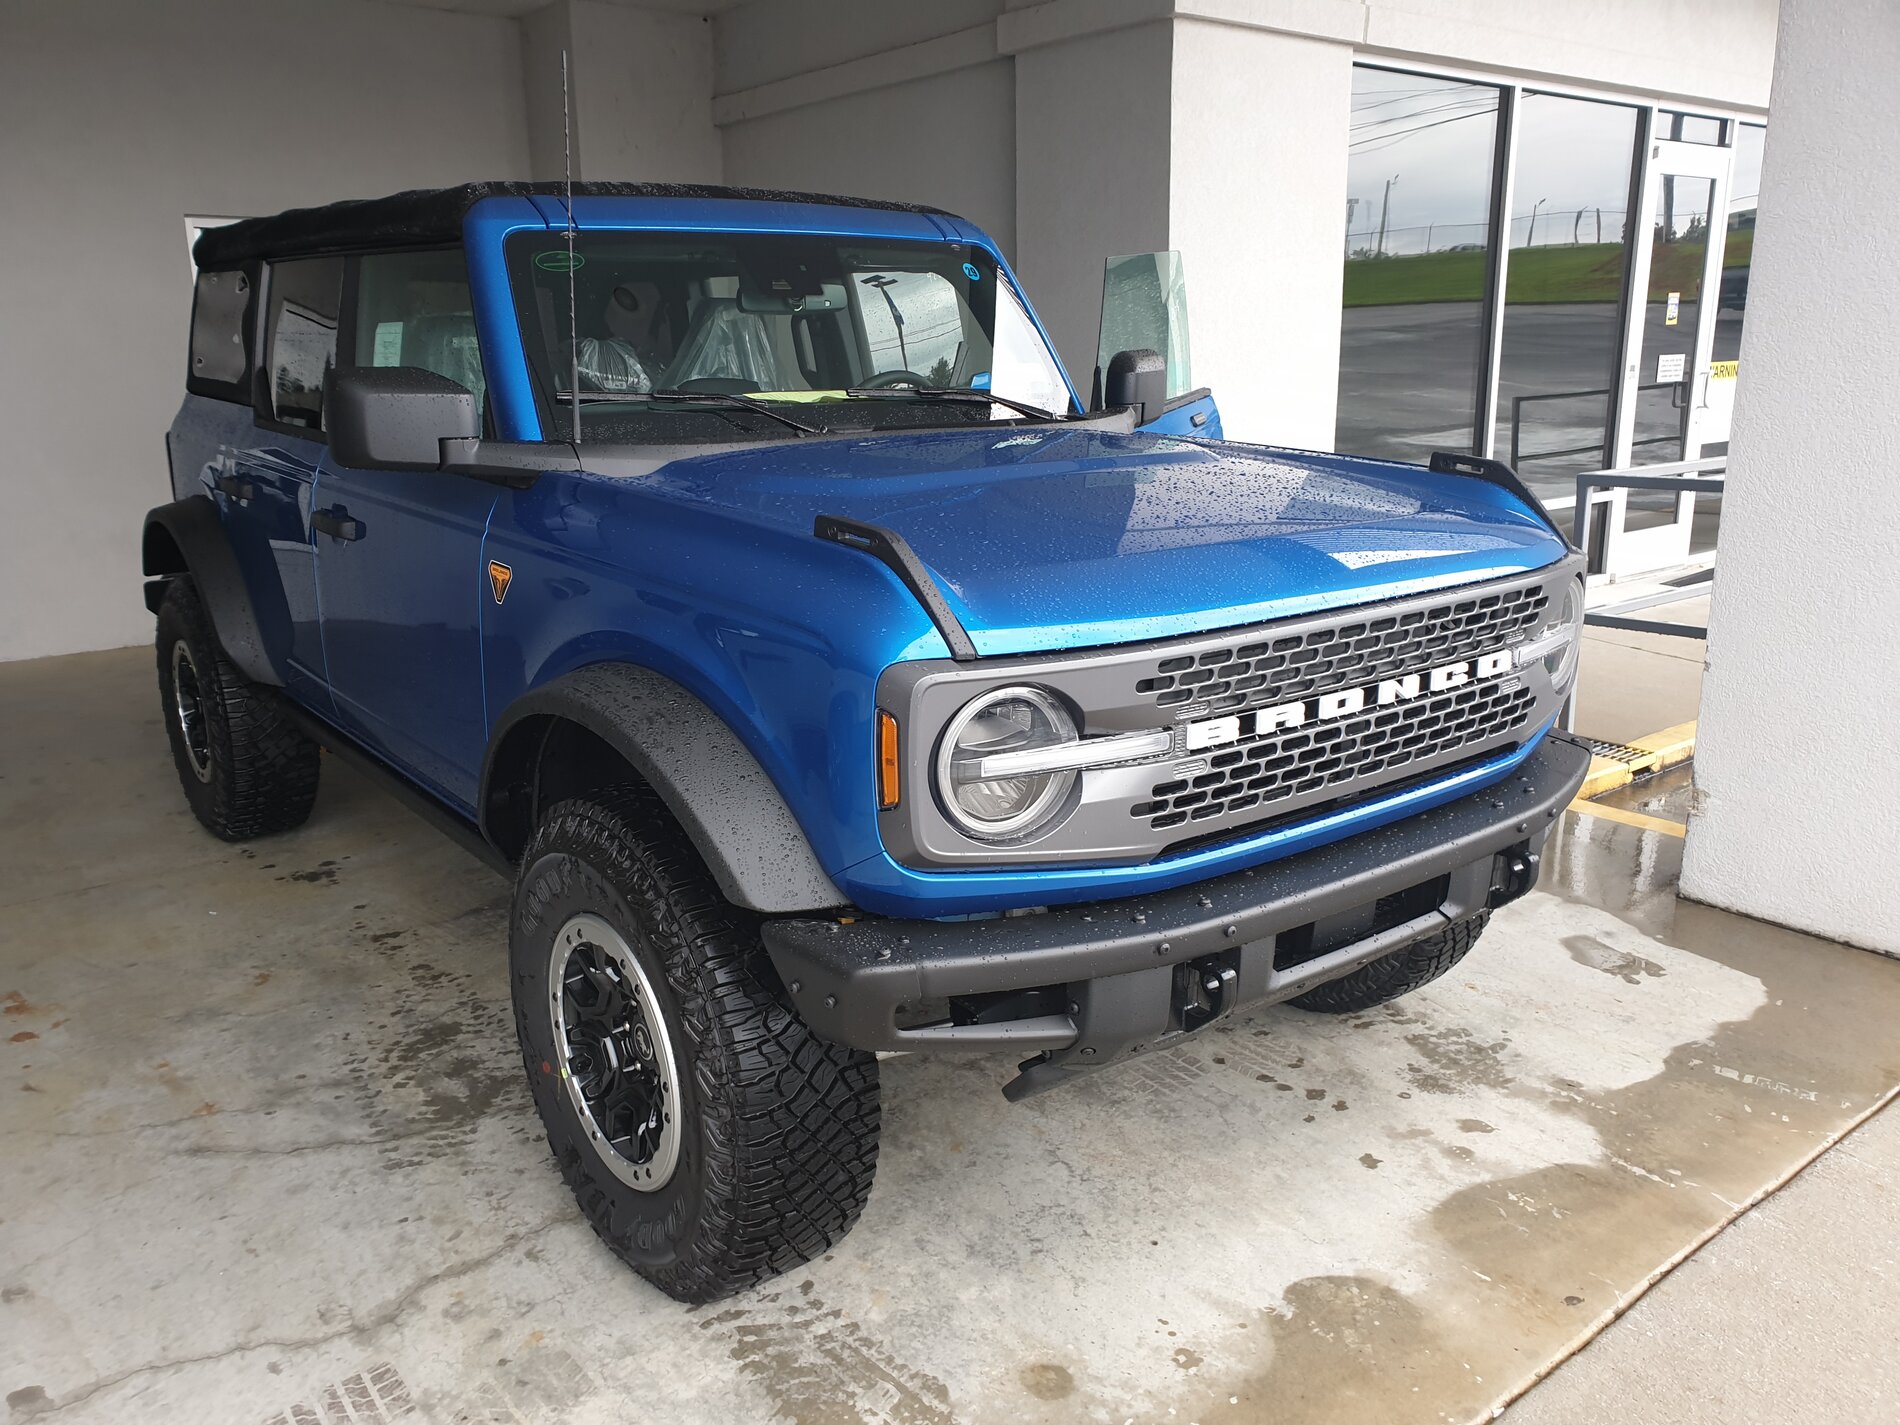 Ford Bronco First 24 hrs in my Badlands Sasquatch 4dr 2.7L Velocity Blue Soft Top (w/ Rear Cargo Enclosure review) 20210719_175620